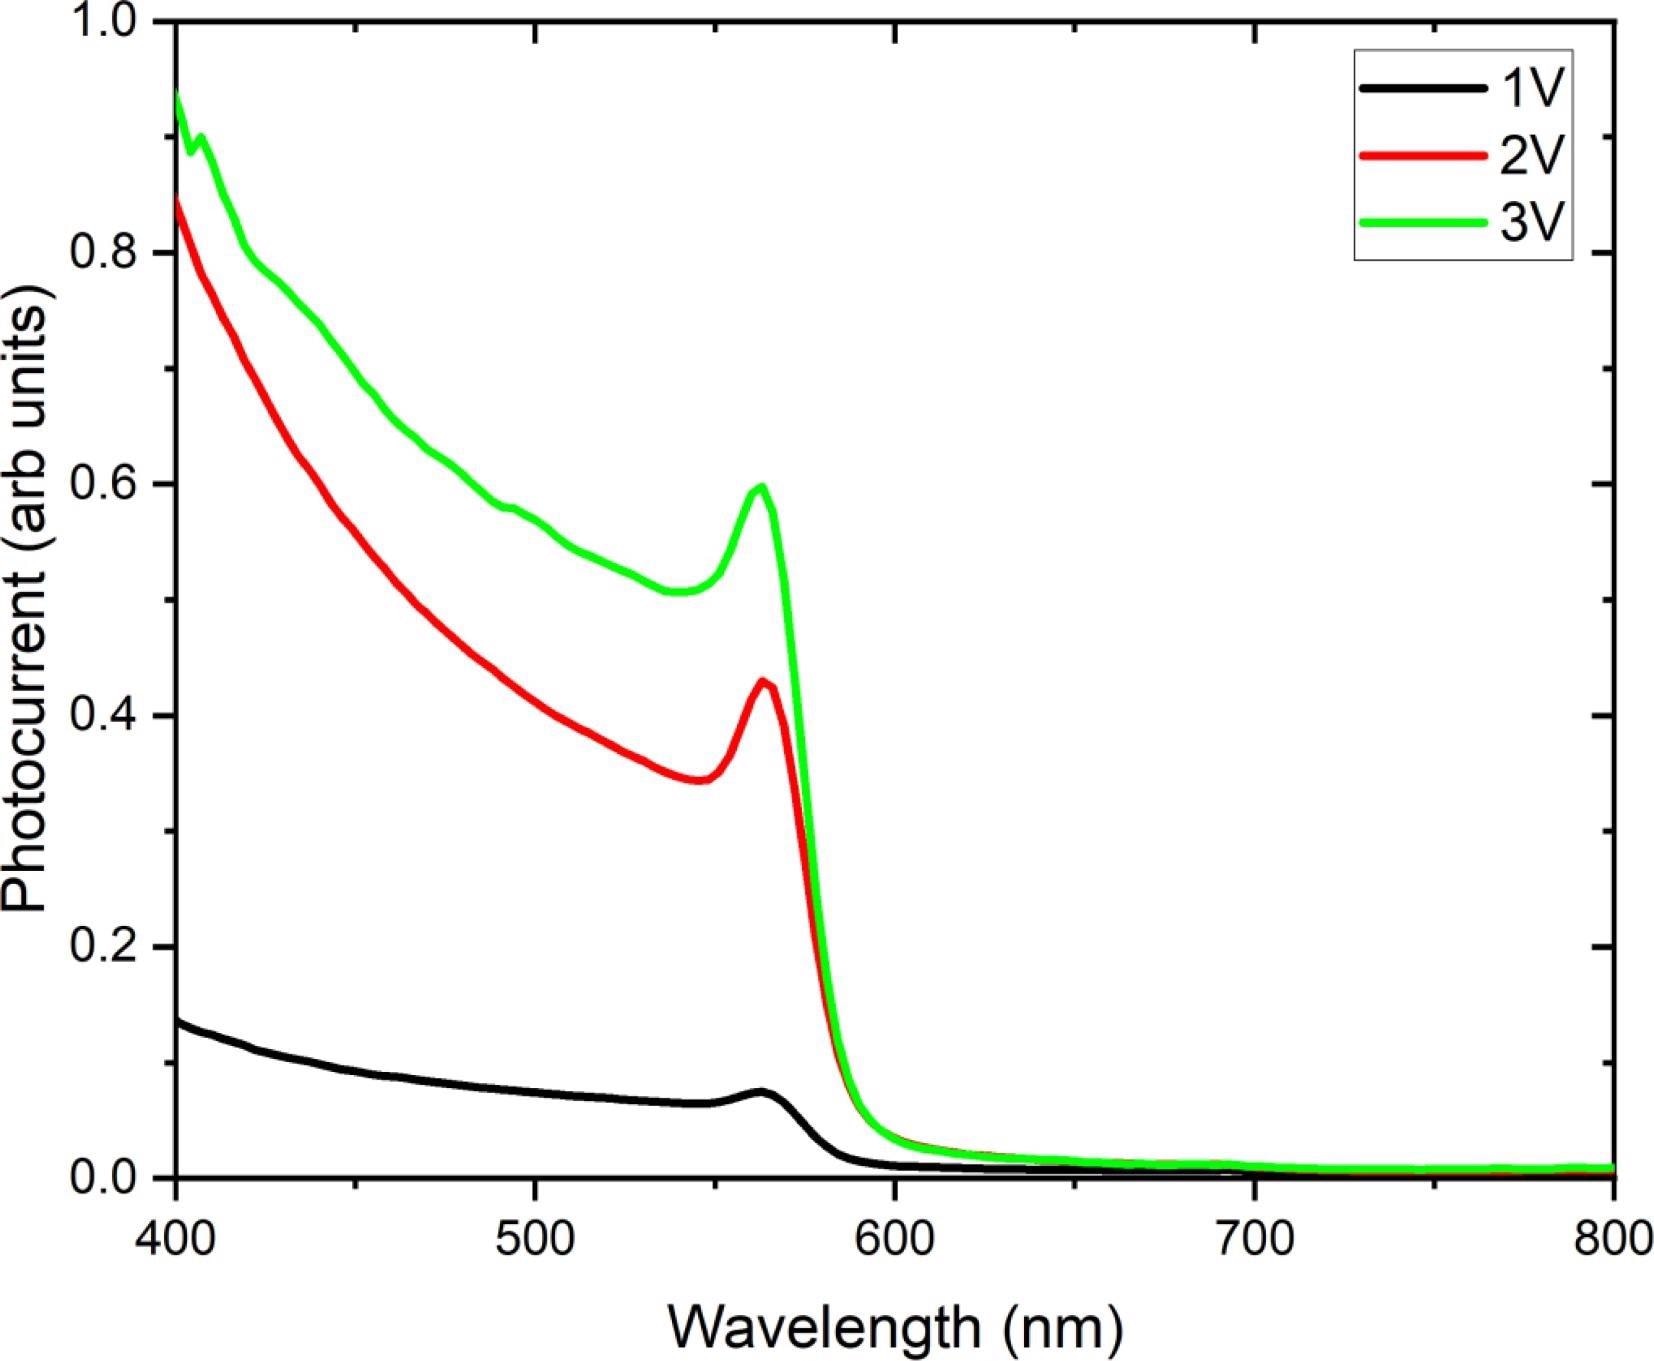 Optical photocurrent measured from one FAPbBr3 sensor as a function of wavelength, acquired under three bias conditions of 1 V, 2 V, and 3 V. The photocurrent response edge at 580 nm corresponds to the material bandgap at 2.13 eV.